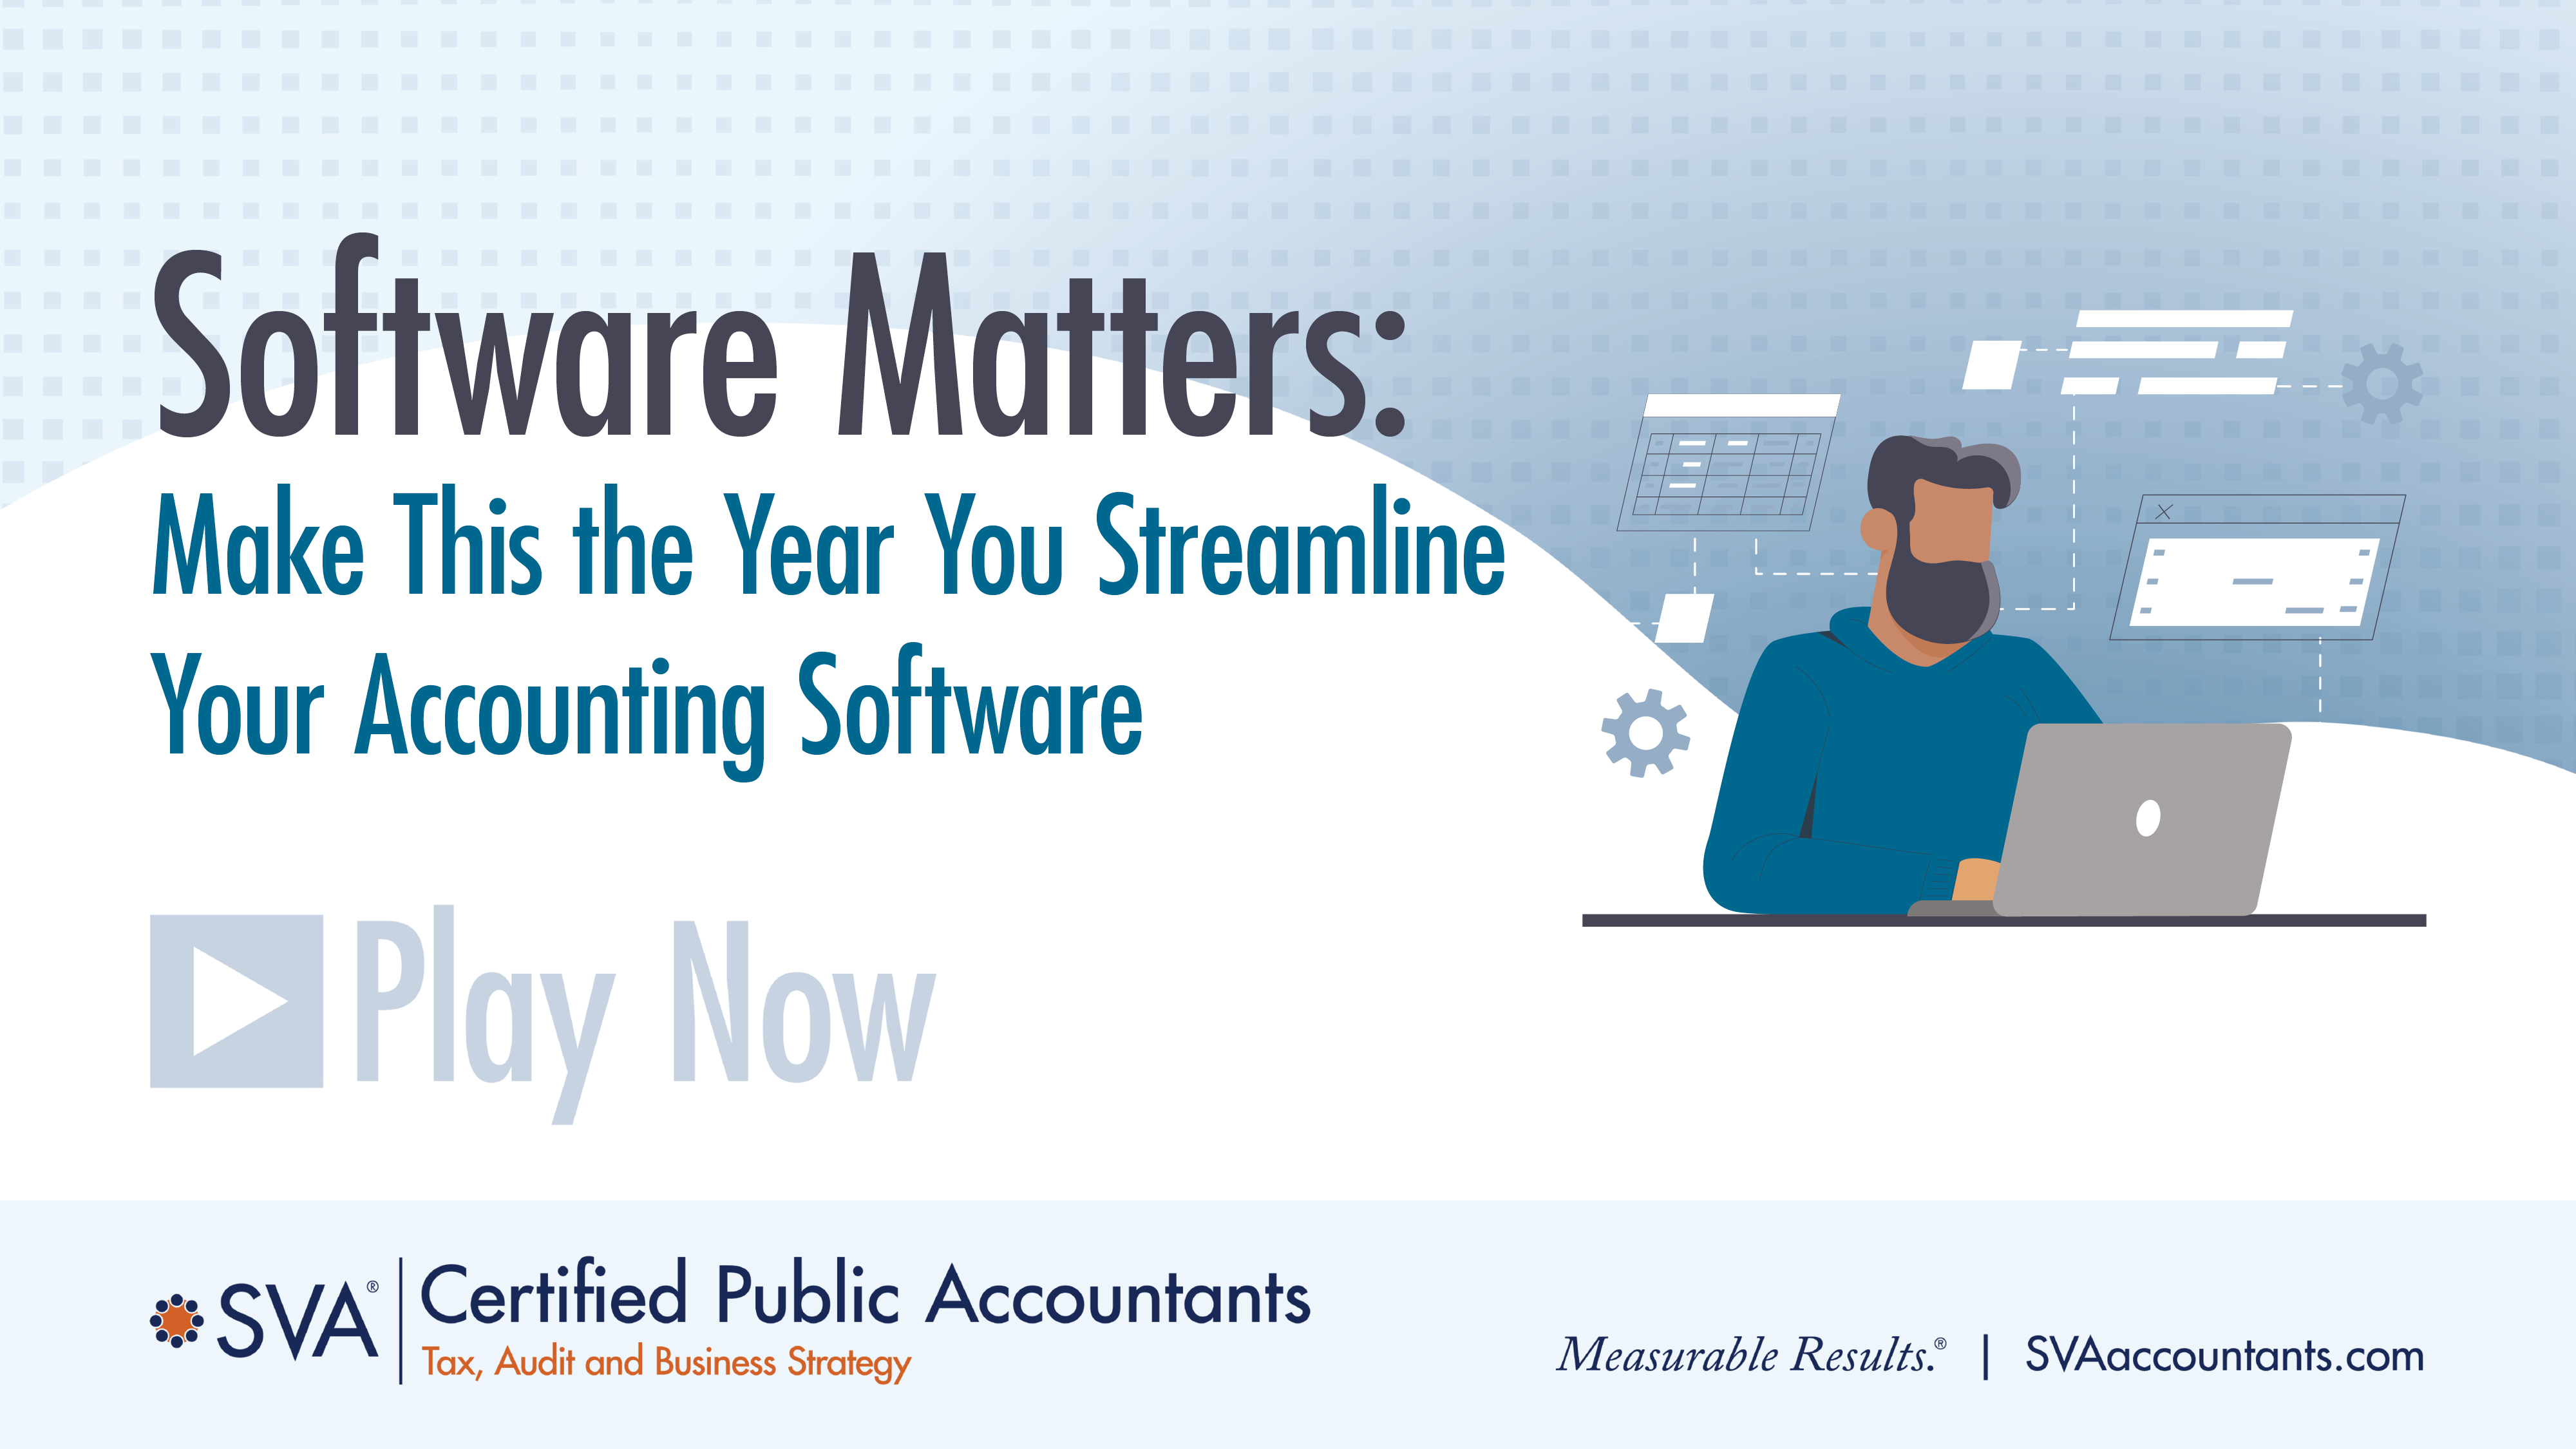 Software Matters: Make This the Year You Streamline Your Accounting Software